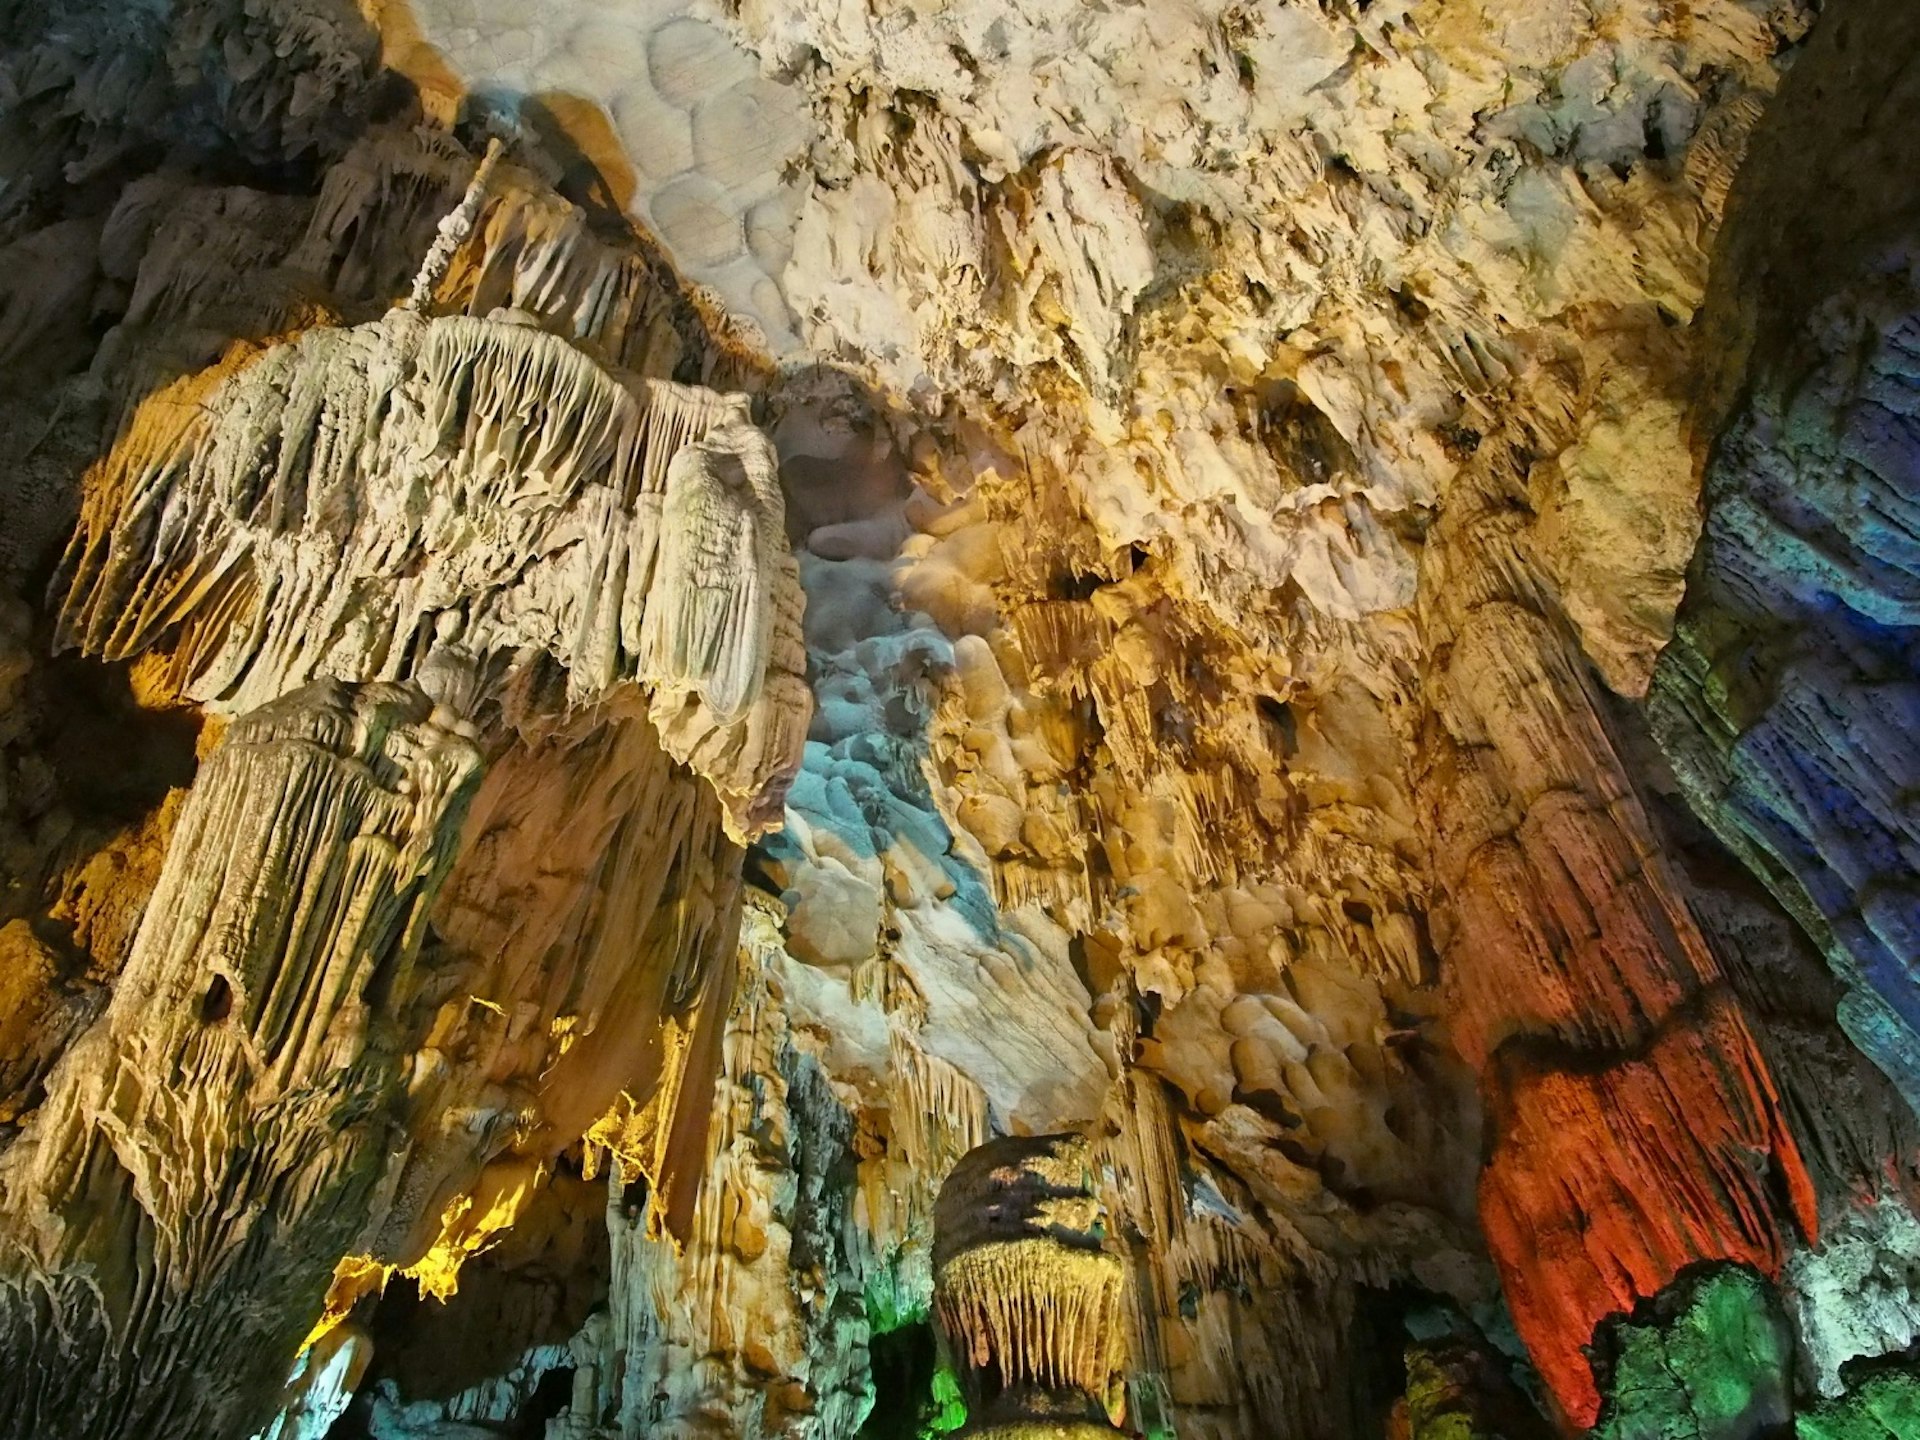 Tan stalactites and stalagmites are illuminated by red, green and yellow lights inside Hang Thien Cung, a cave at Halong Bay.